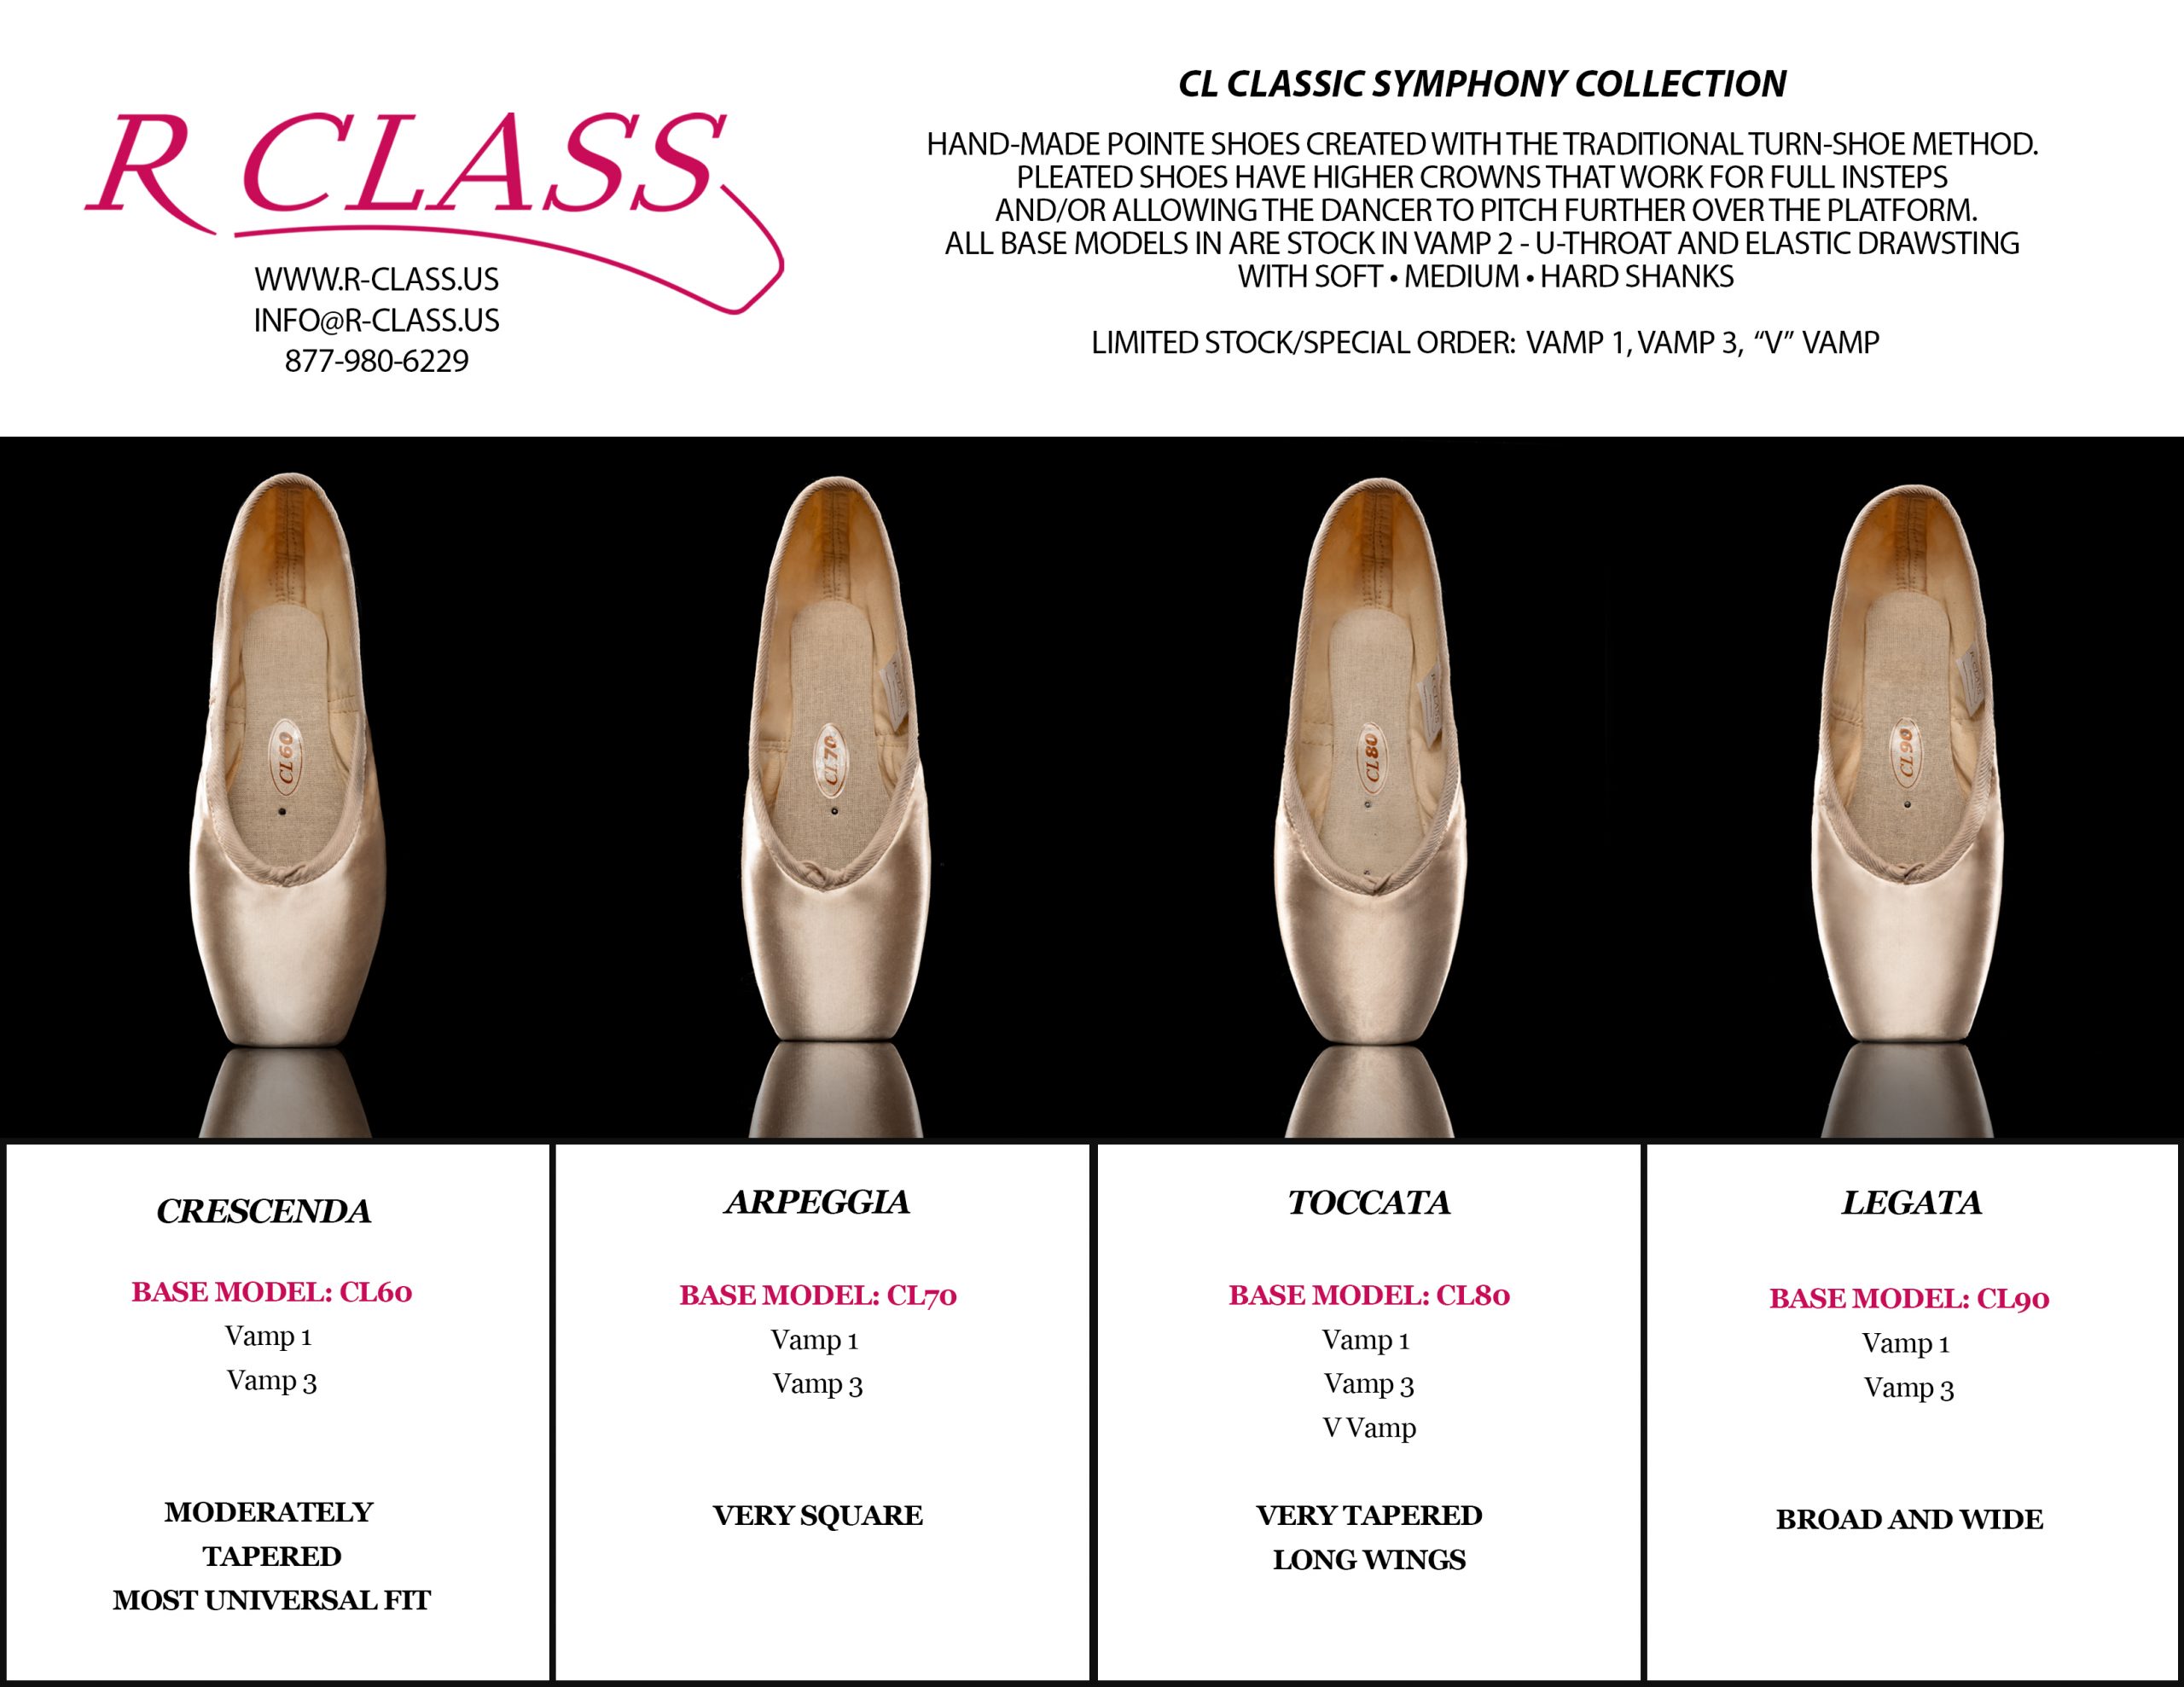 R-Class RC Signature Collection are made with pleatless technology and stitched soles. These six models have shallow crowns that fit lower profile feet and/or alllow the dancer to stay higher in her shoe.